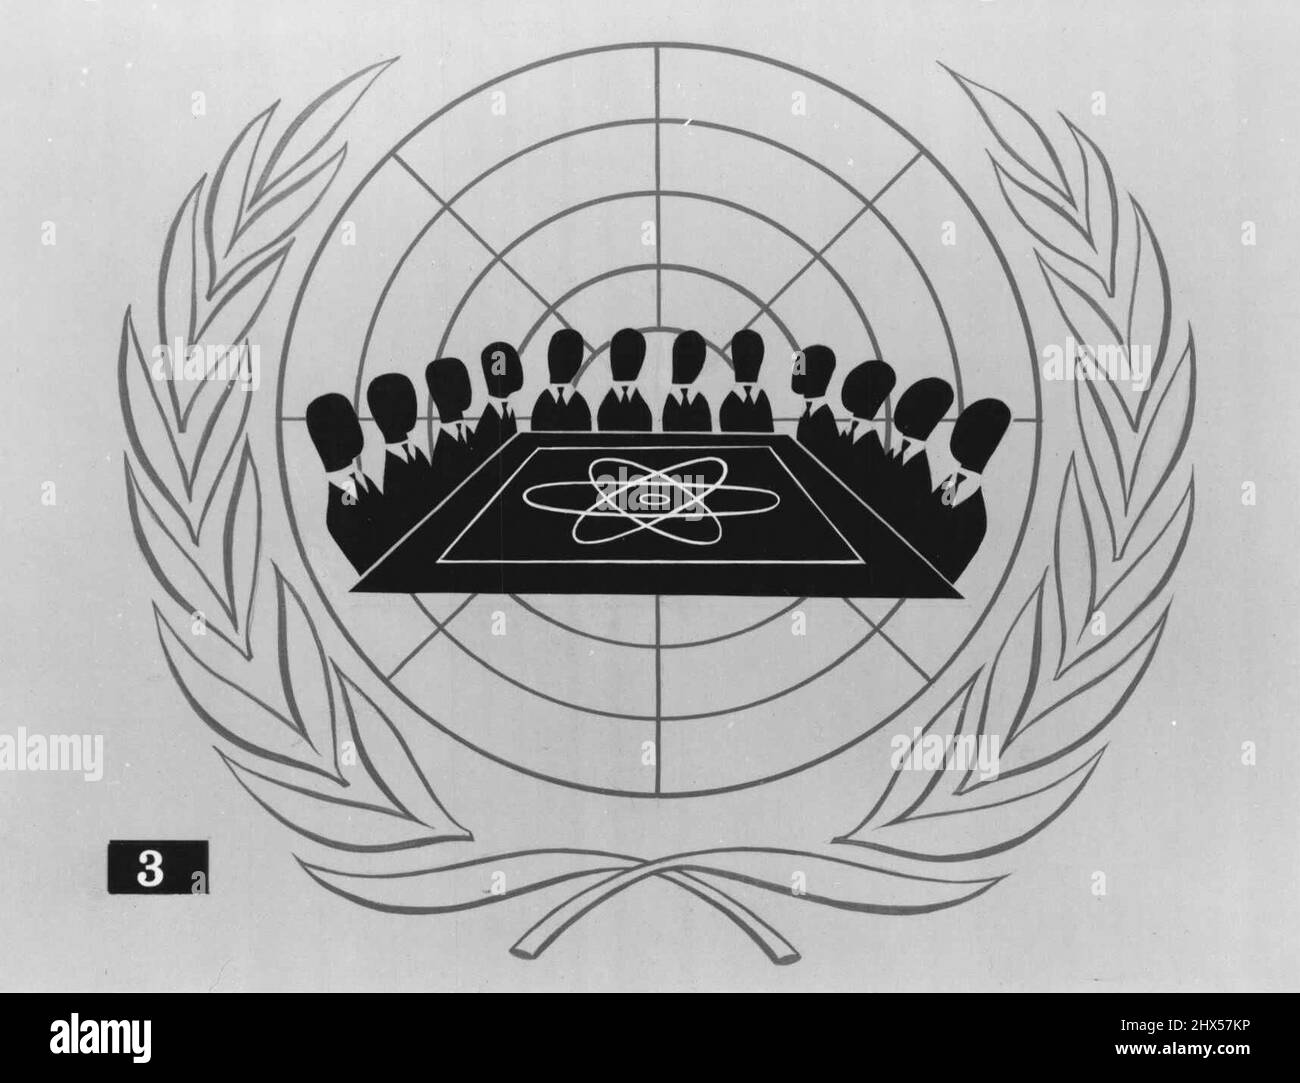 Atomic Energy - Problems Of International Control. The commission began its work by formulating its rules and setting up Committees. During its meetings, which extended over a period of two years all its members made known their opinions on how to deal with the problems raised. April 12, 1949. (Photo by Official United Nations). Stock Photo